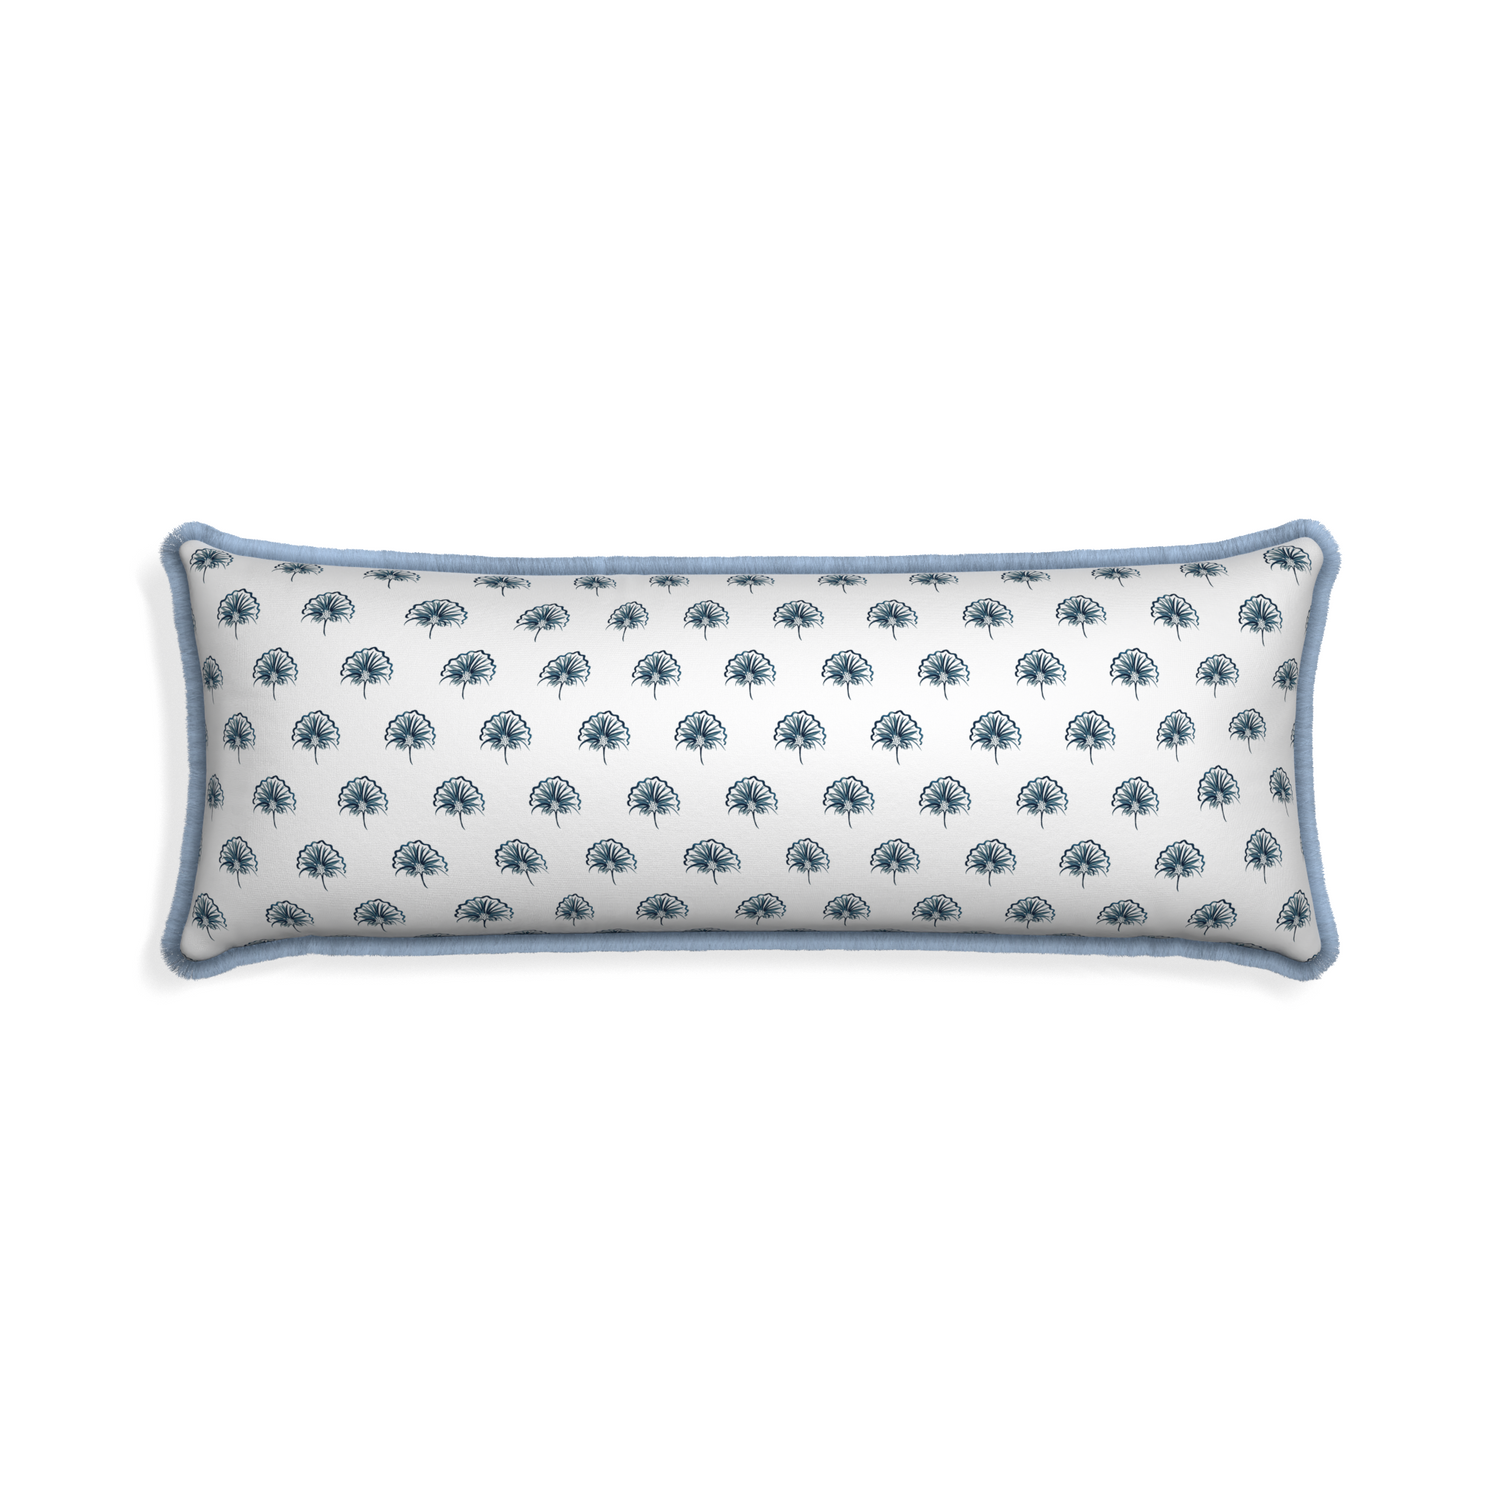 Xl-lumbar penelope midnight custom floral navypillow with sky fringe on white background